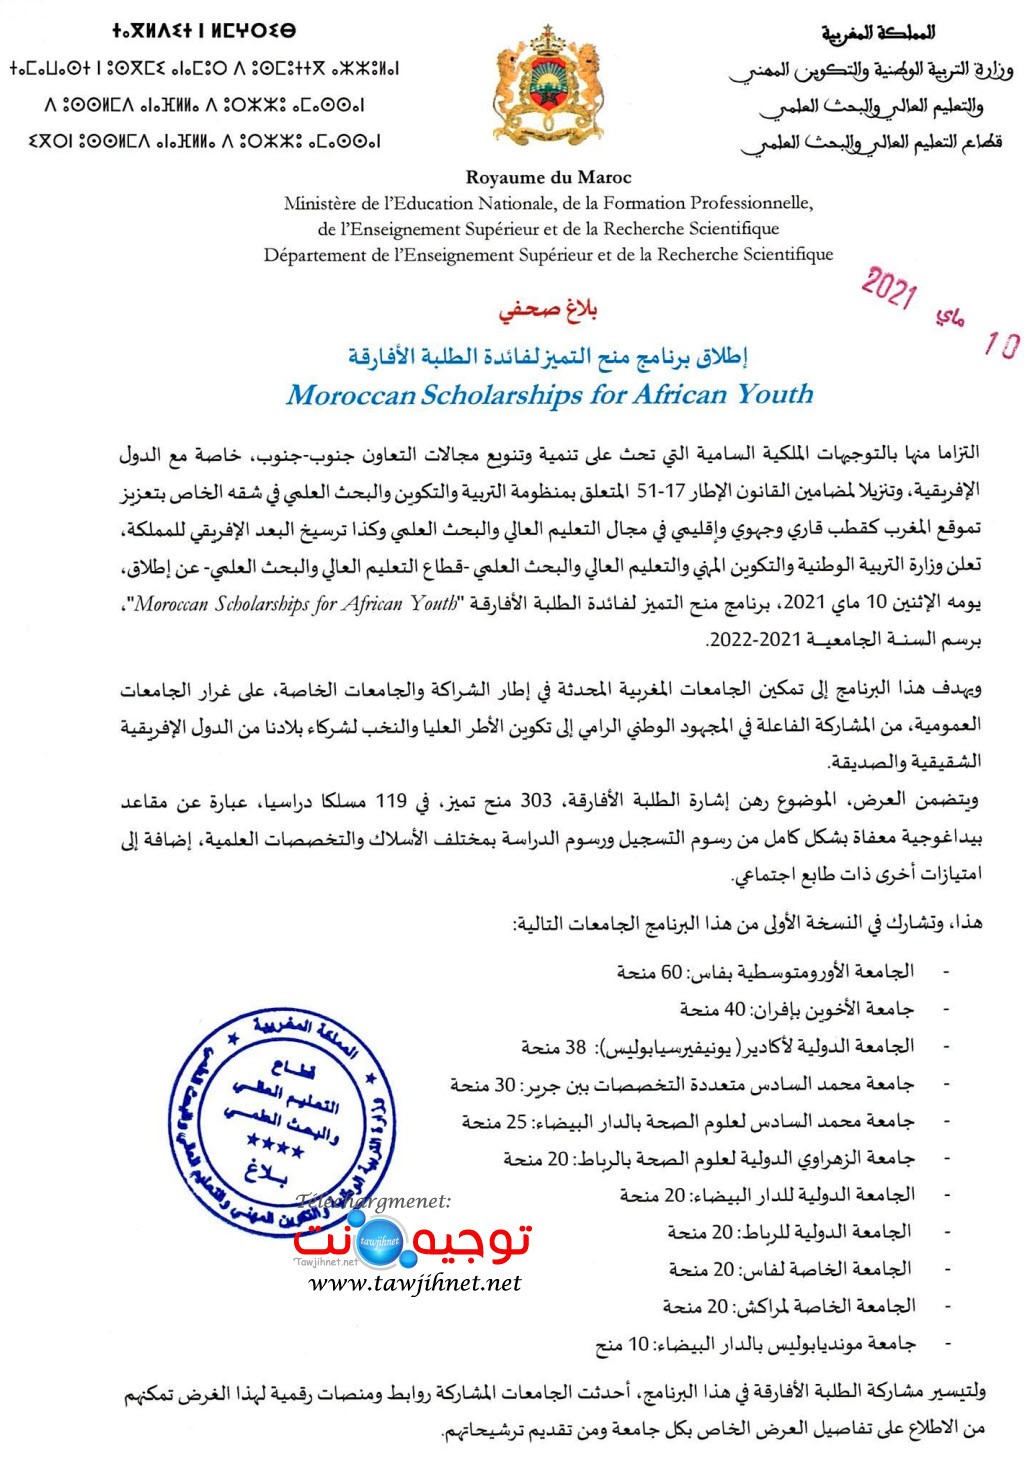 Moroccan Scholarships for African Youth.jpg